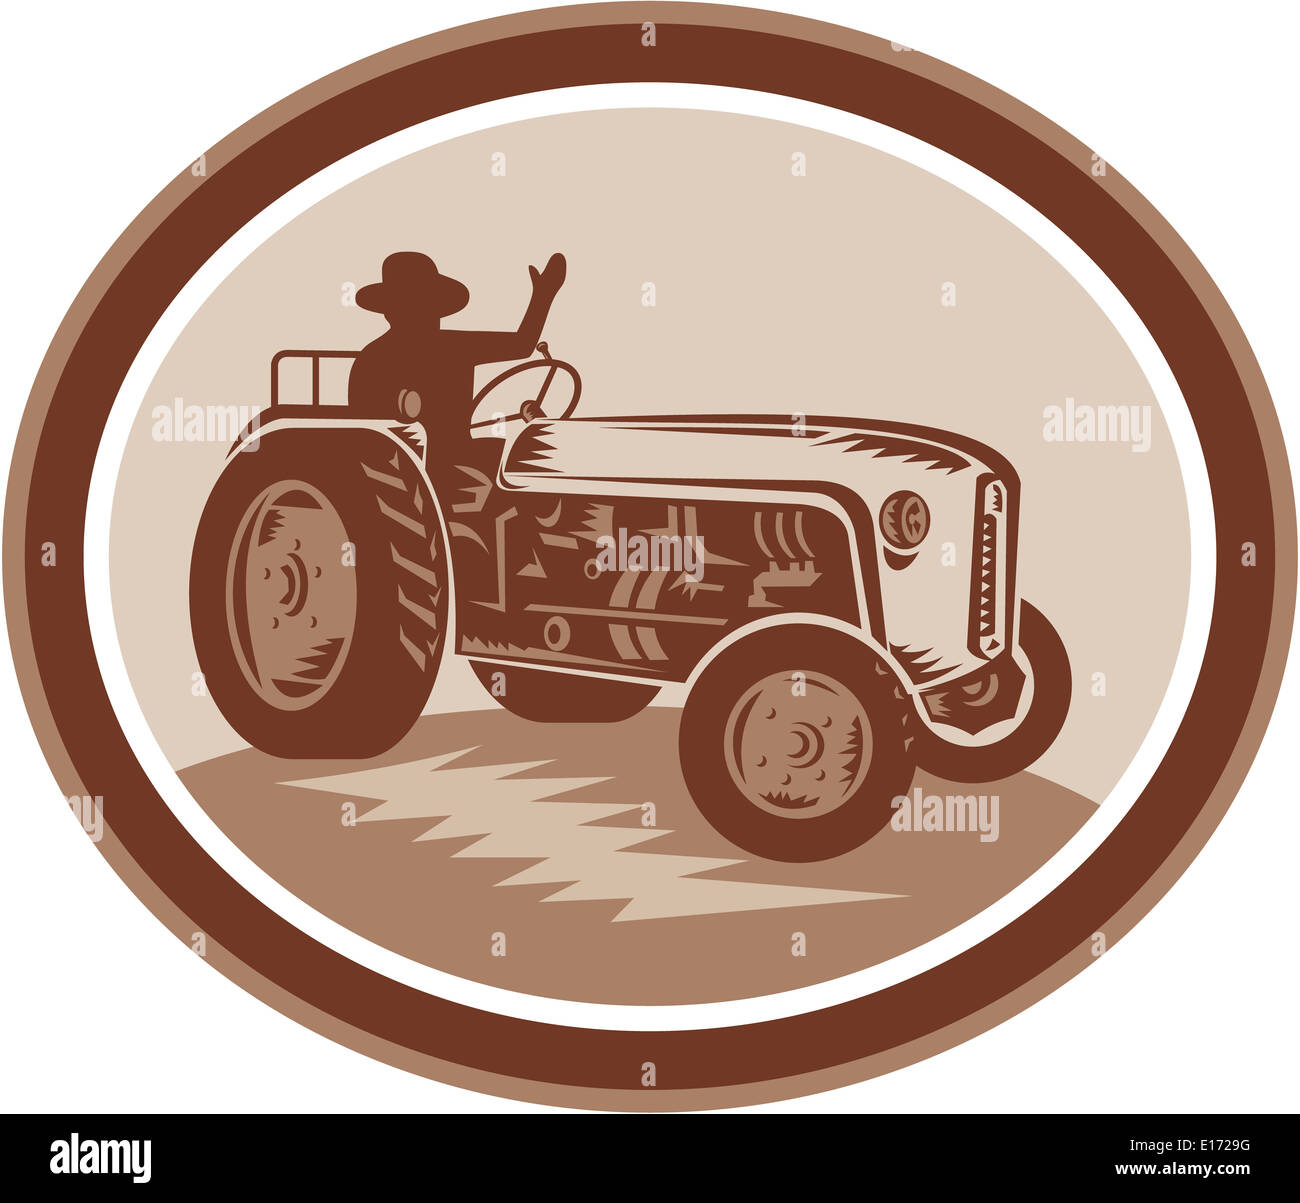 Illustration of a vintage tractor with driver waving set inside a circle done in retro style. Stock Photo